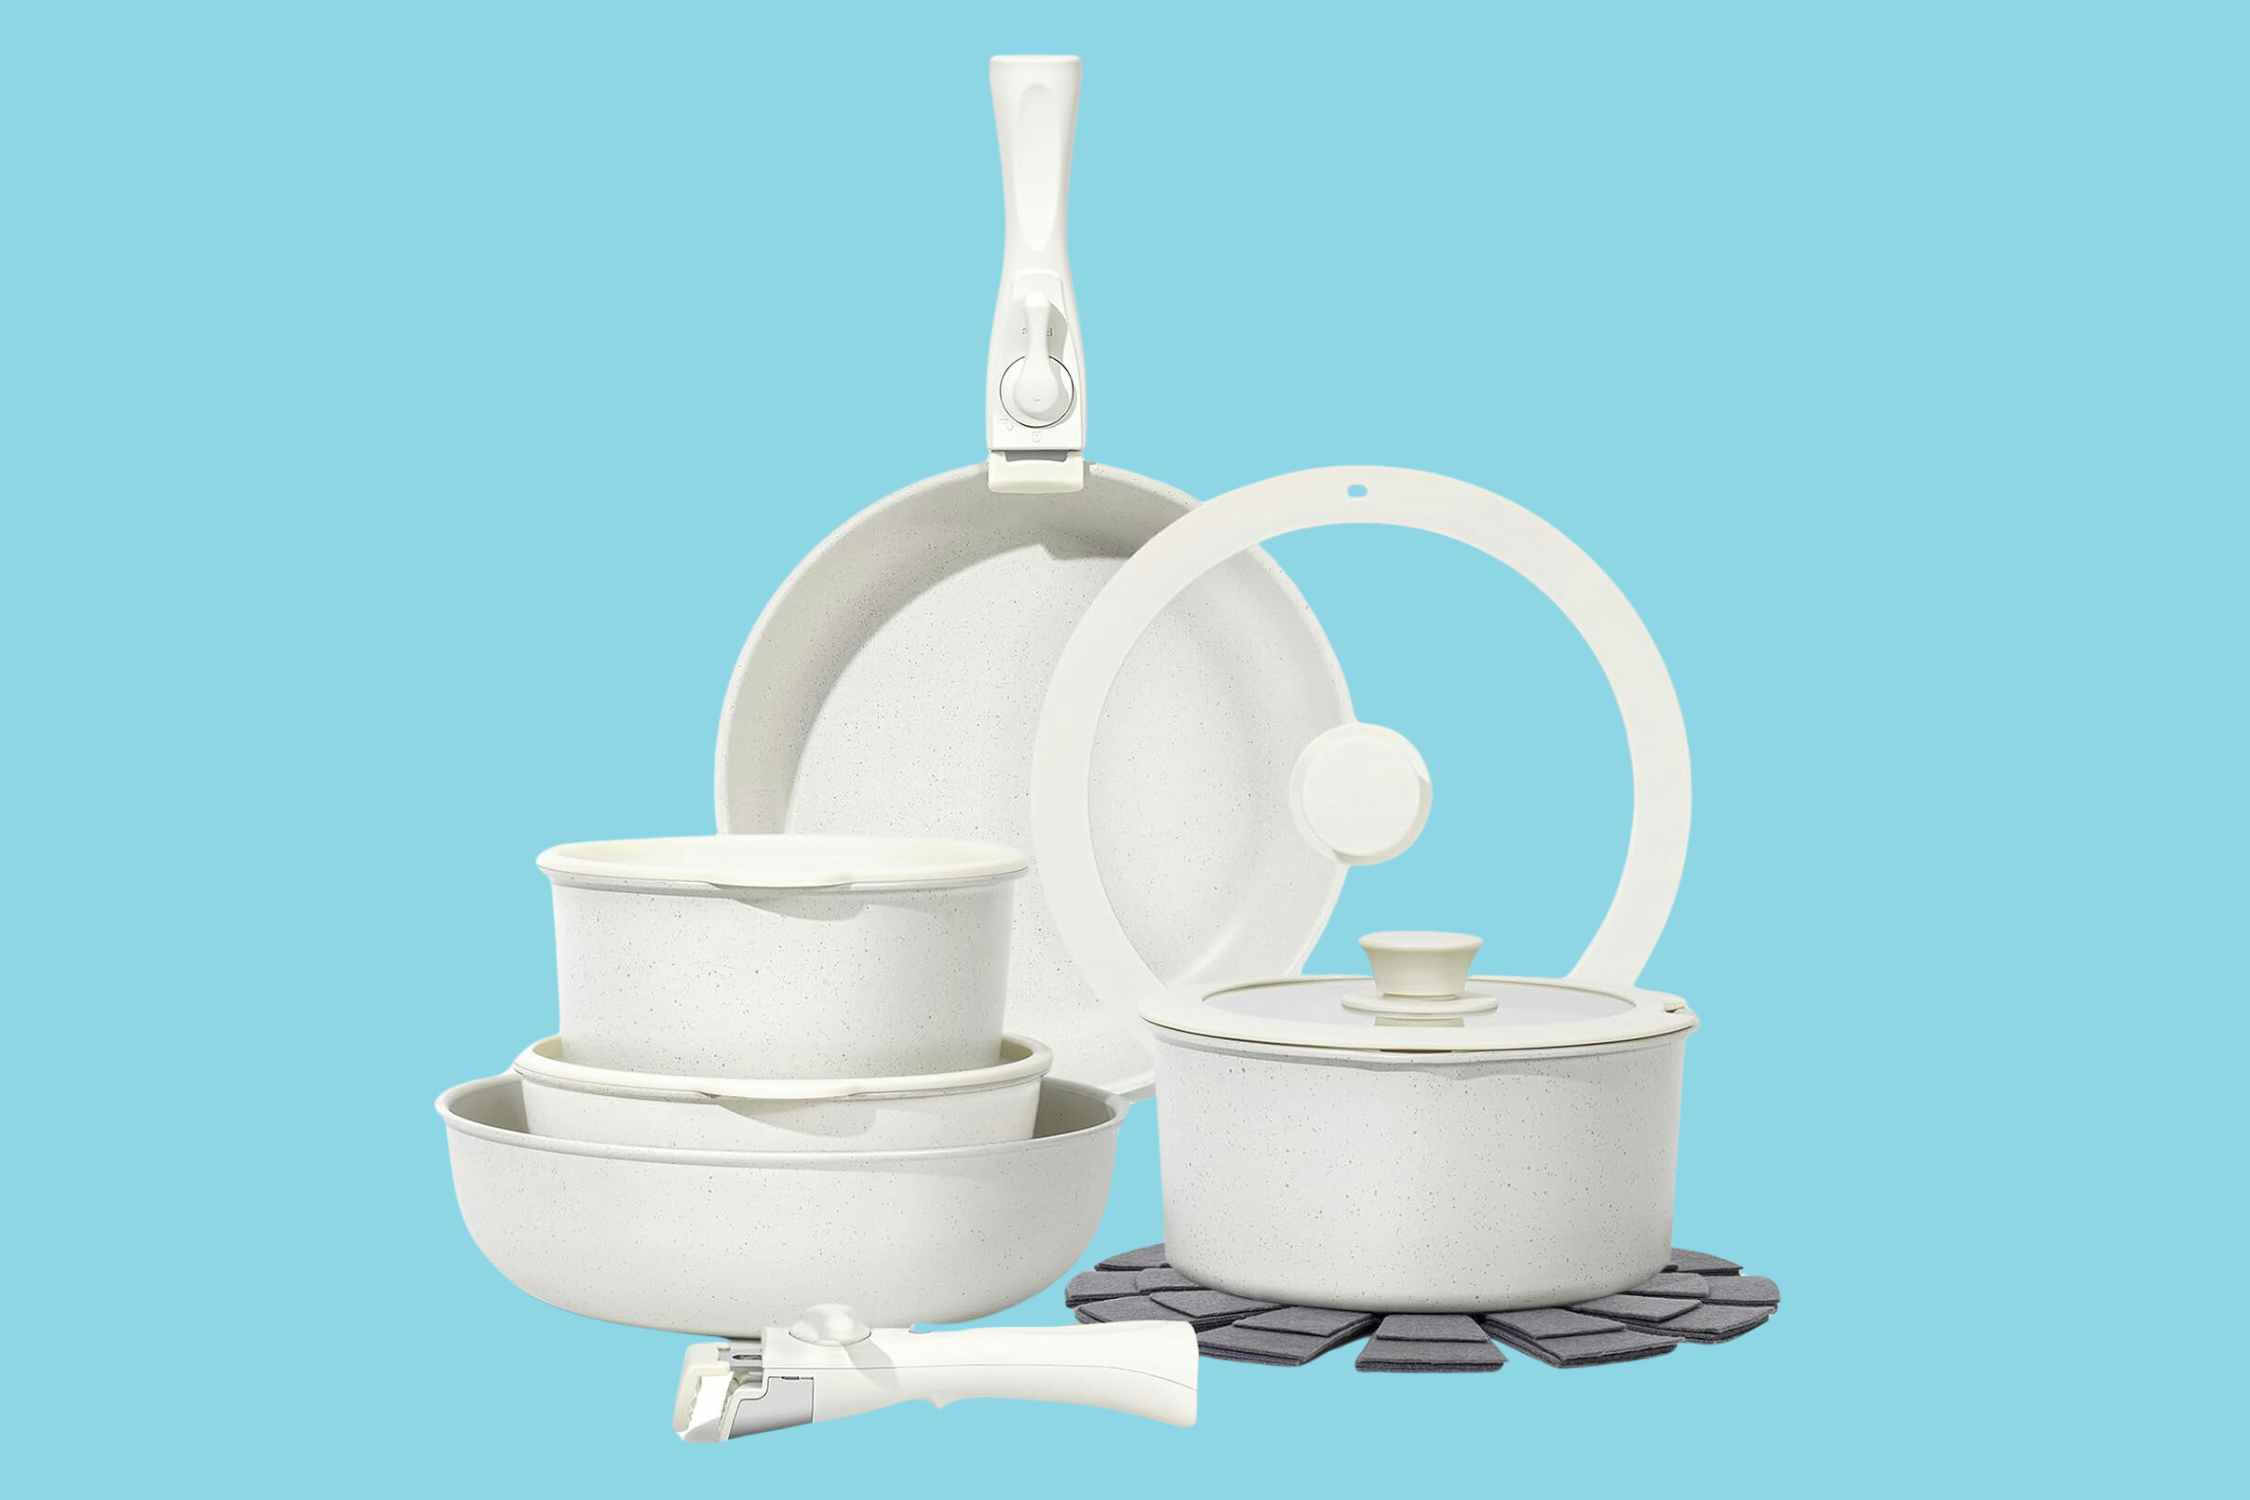 Pots and Pans 15-Piece Set, Only $54.99 on Amazon (Reg. $130)